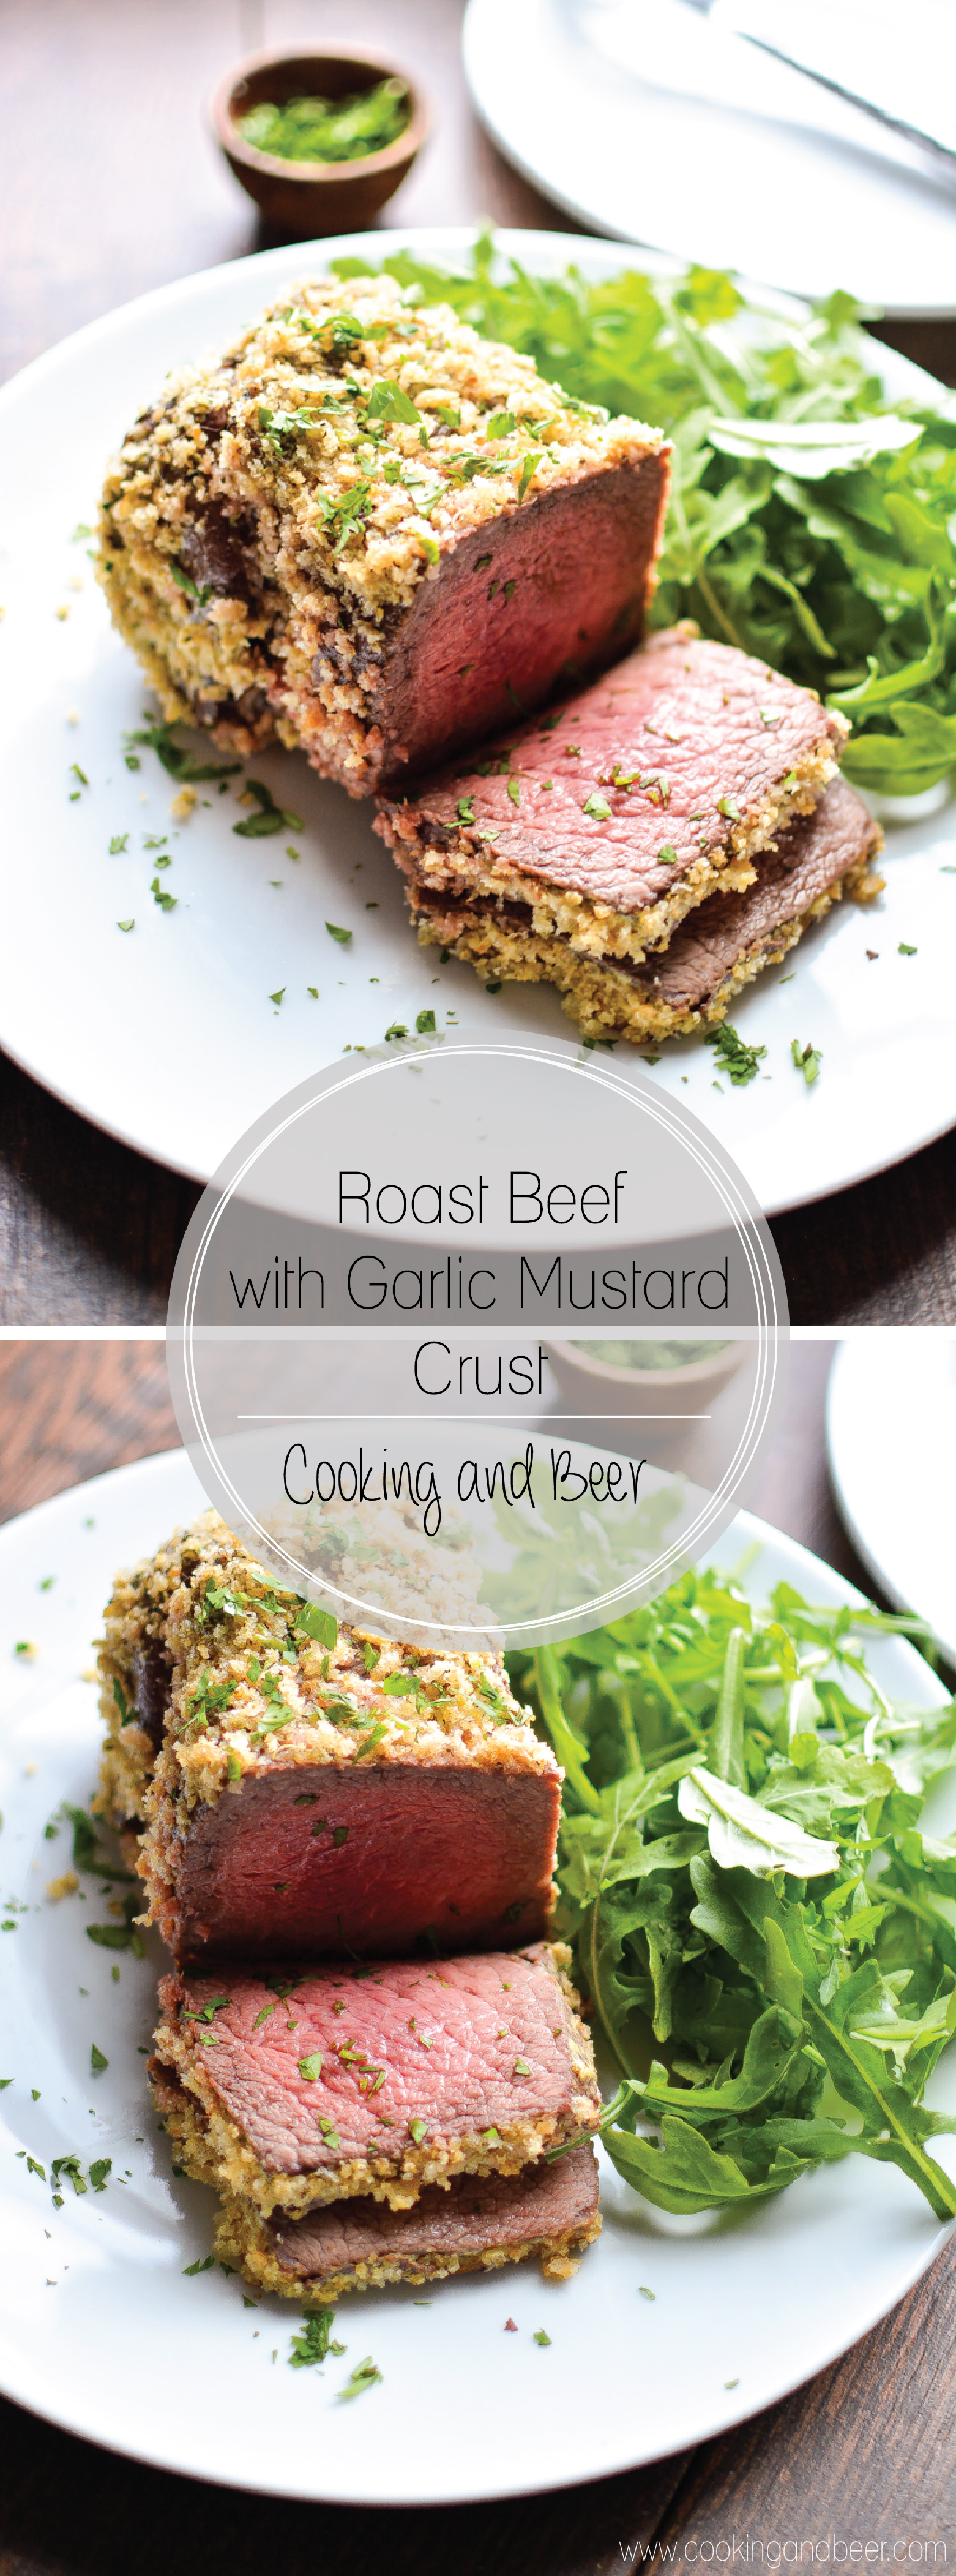 Roast Beef with Garlic Mustard Crust: a simple, yet comforting dinner recipe that's perfect for Sunday supper.